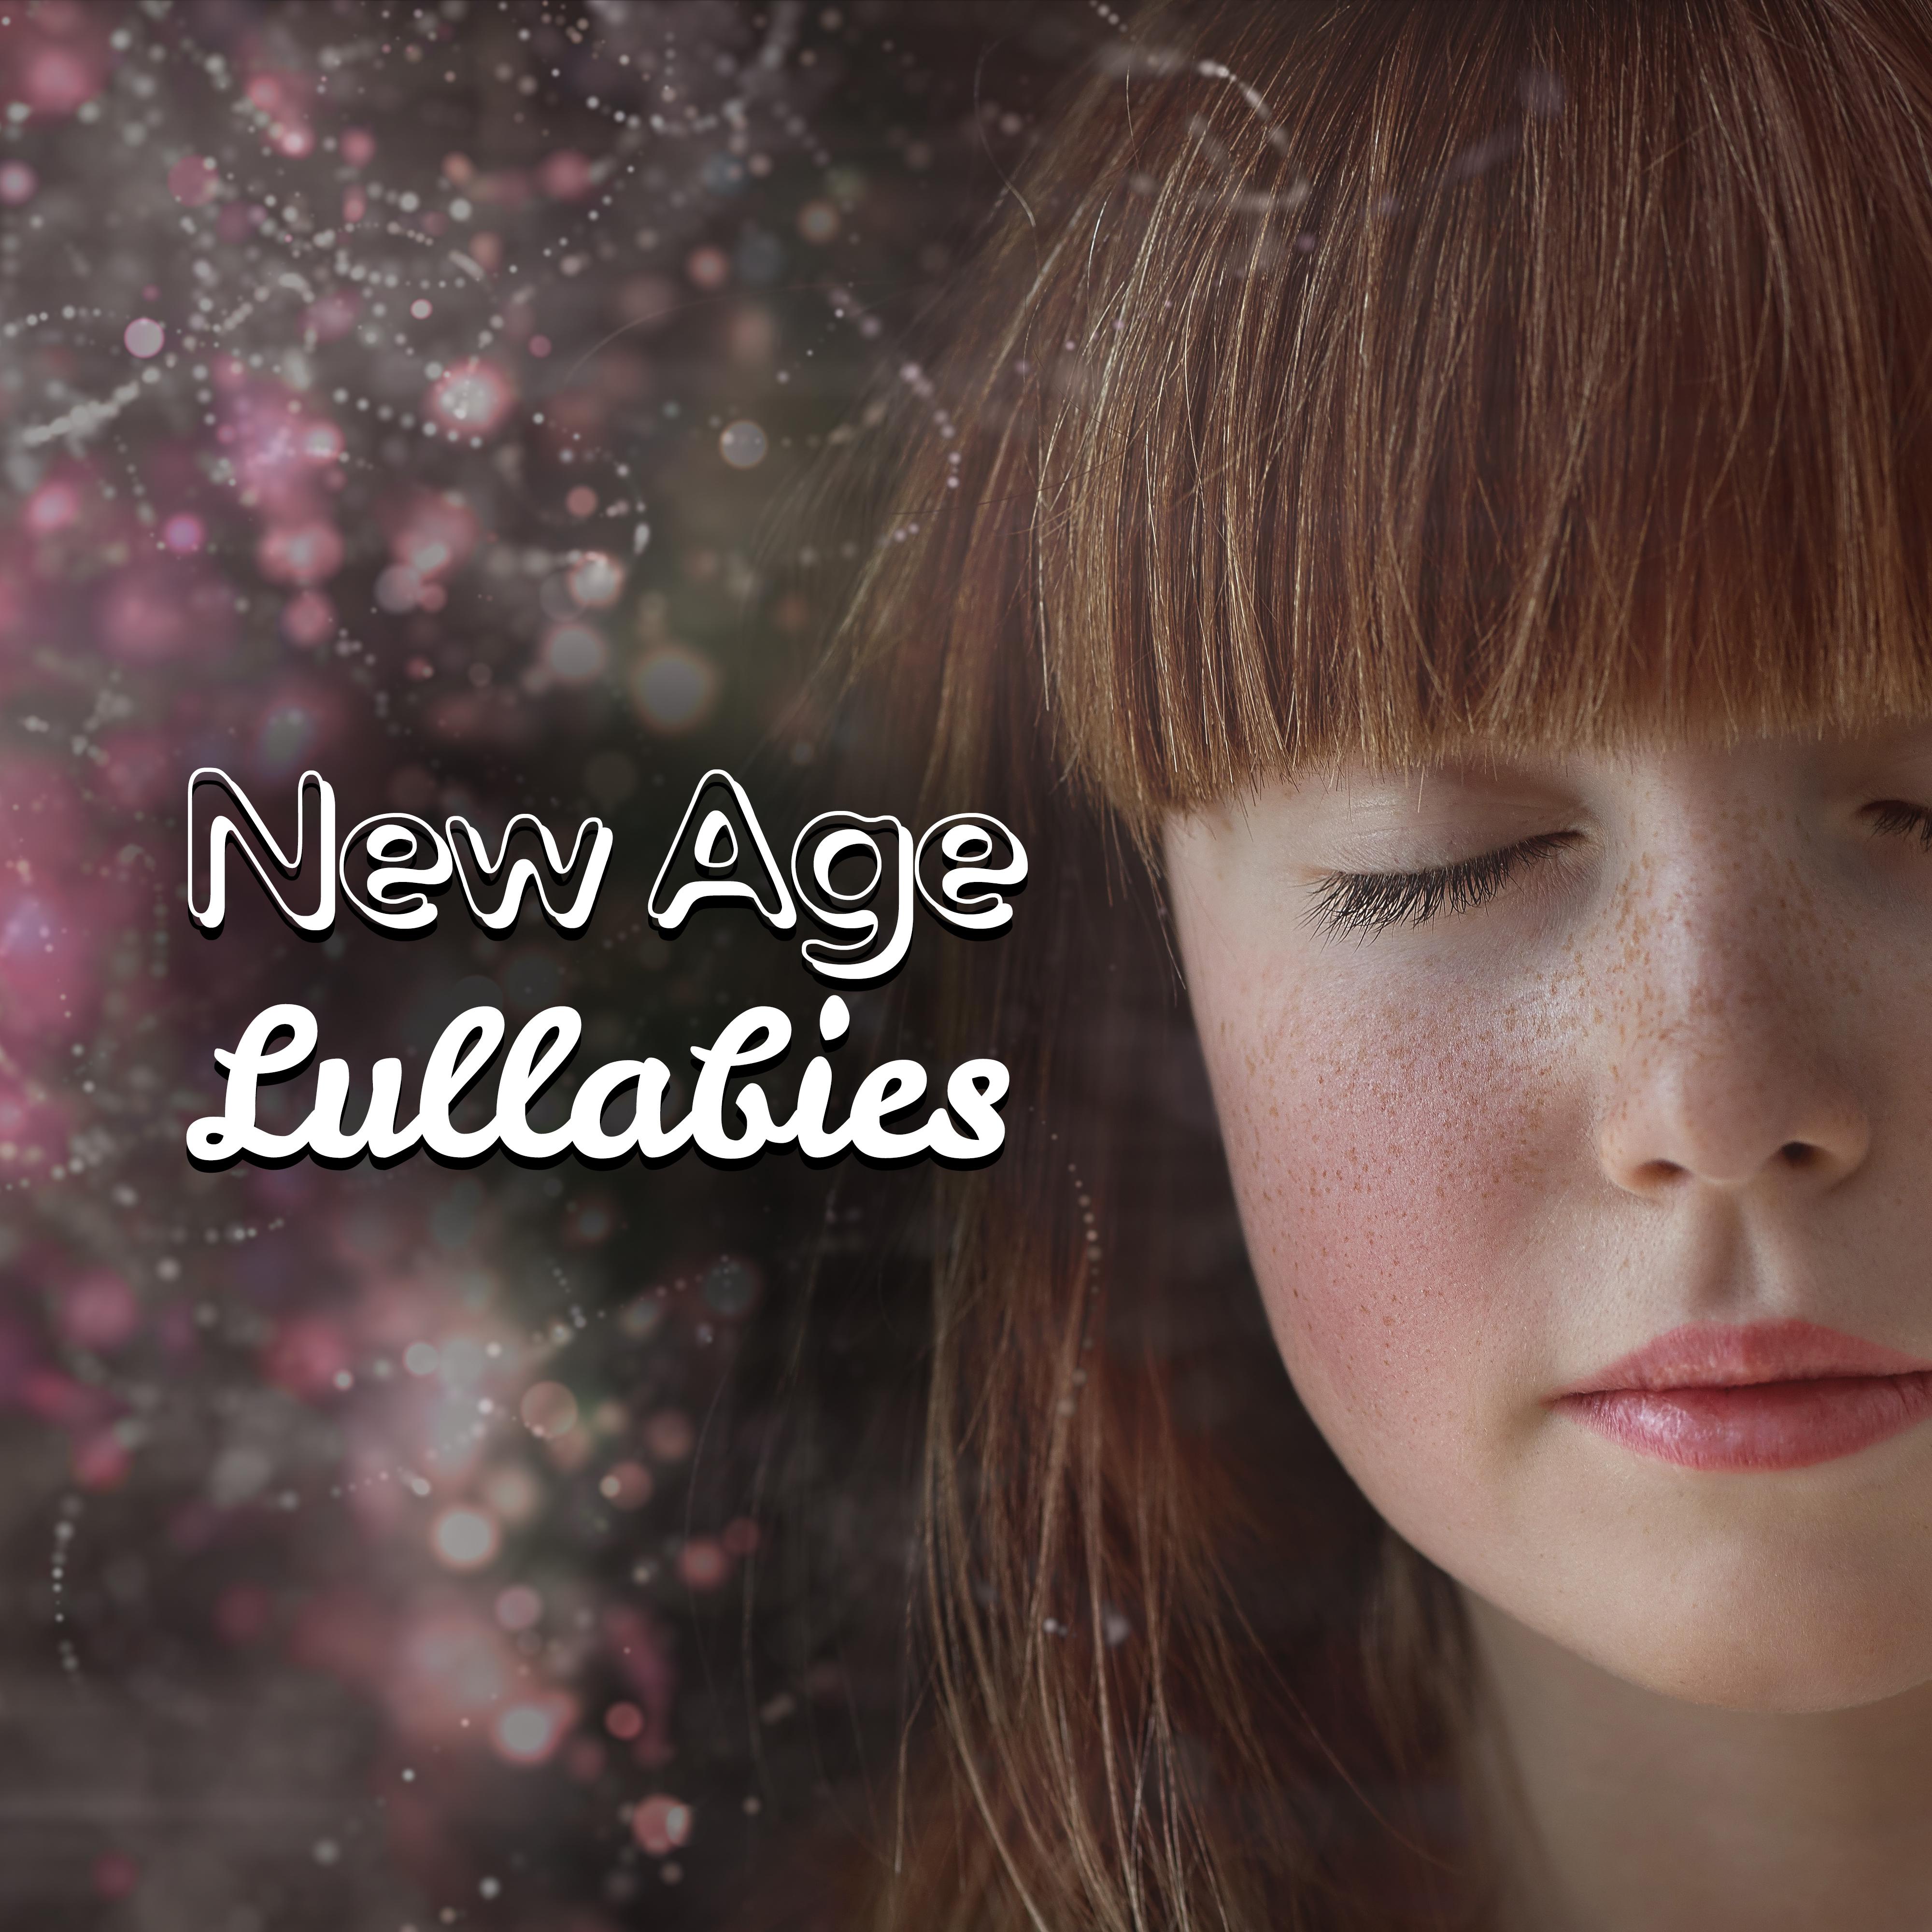 New Age Lullabies  Best Music to Calm Child, Baby Relaxation, Soft Sounds for Kids